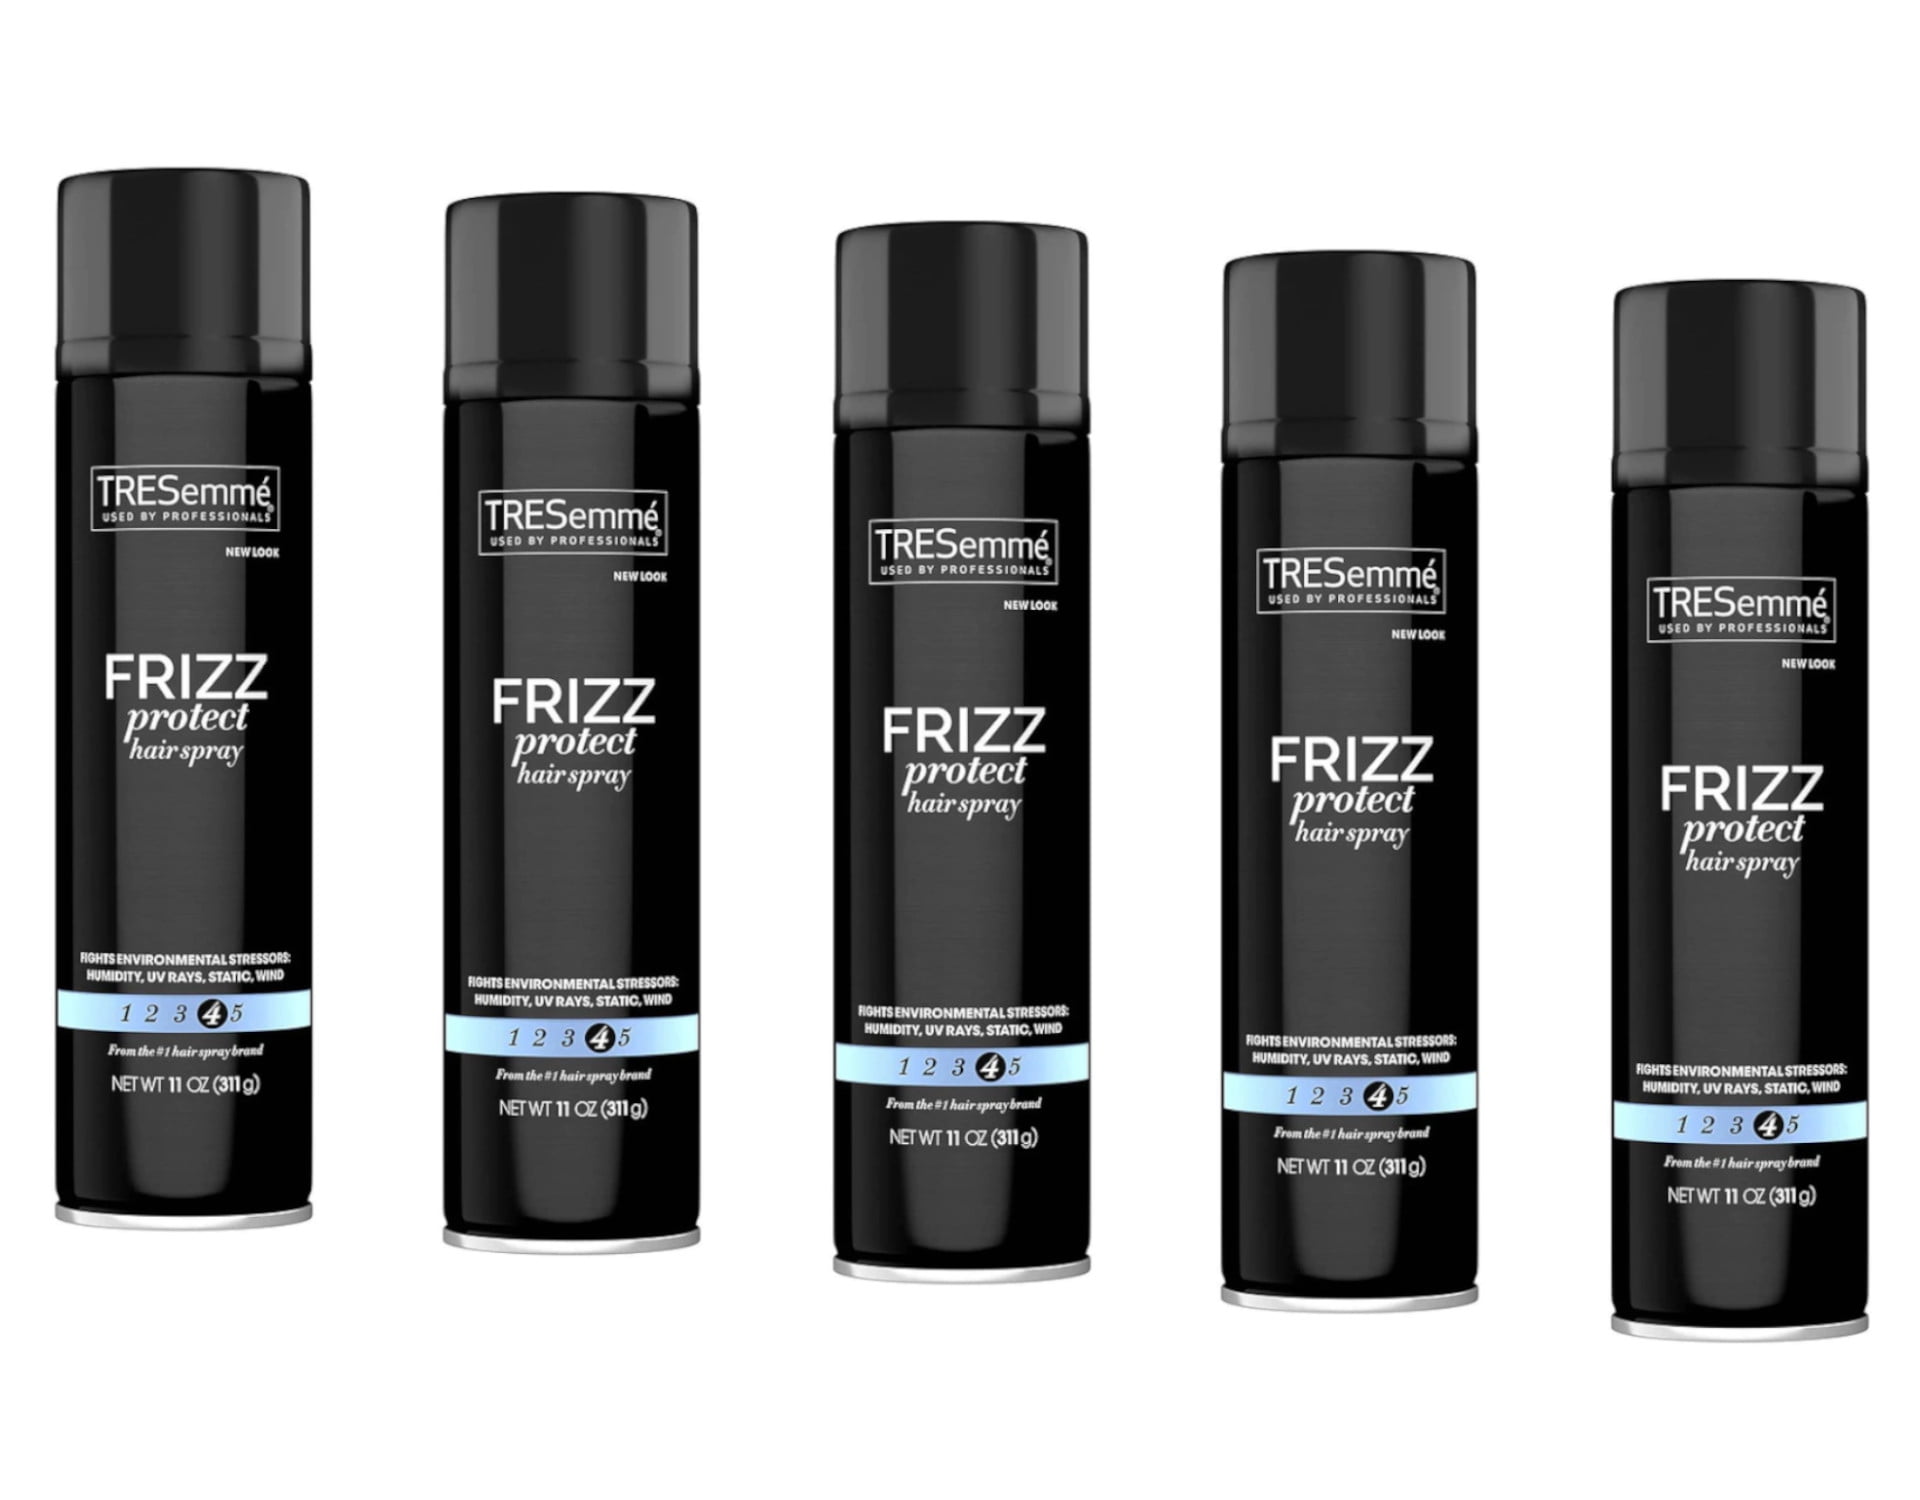 TRESemme Frizz Protect Hair Spray 11 Fluid Oz. (Pack of 5) 